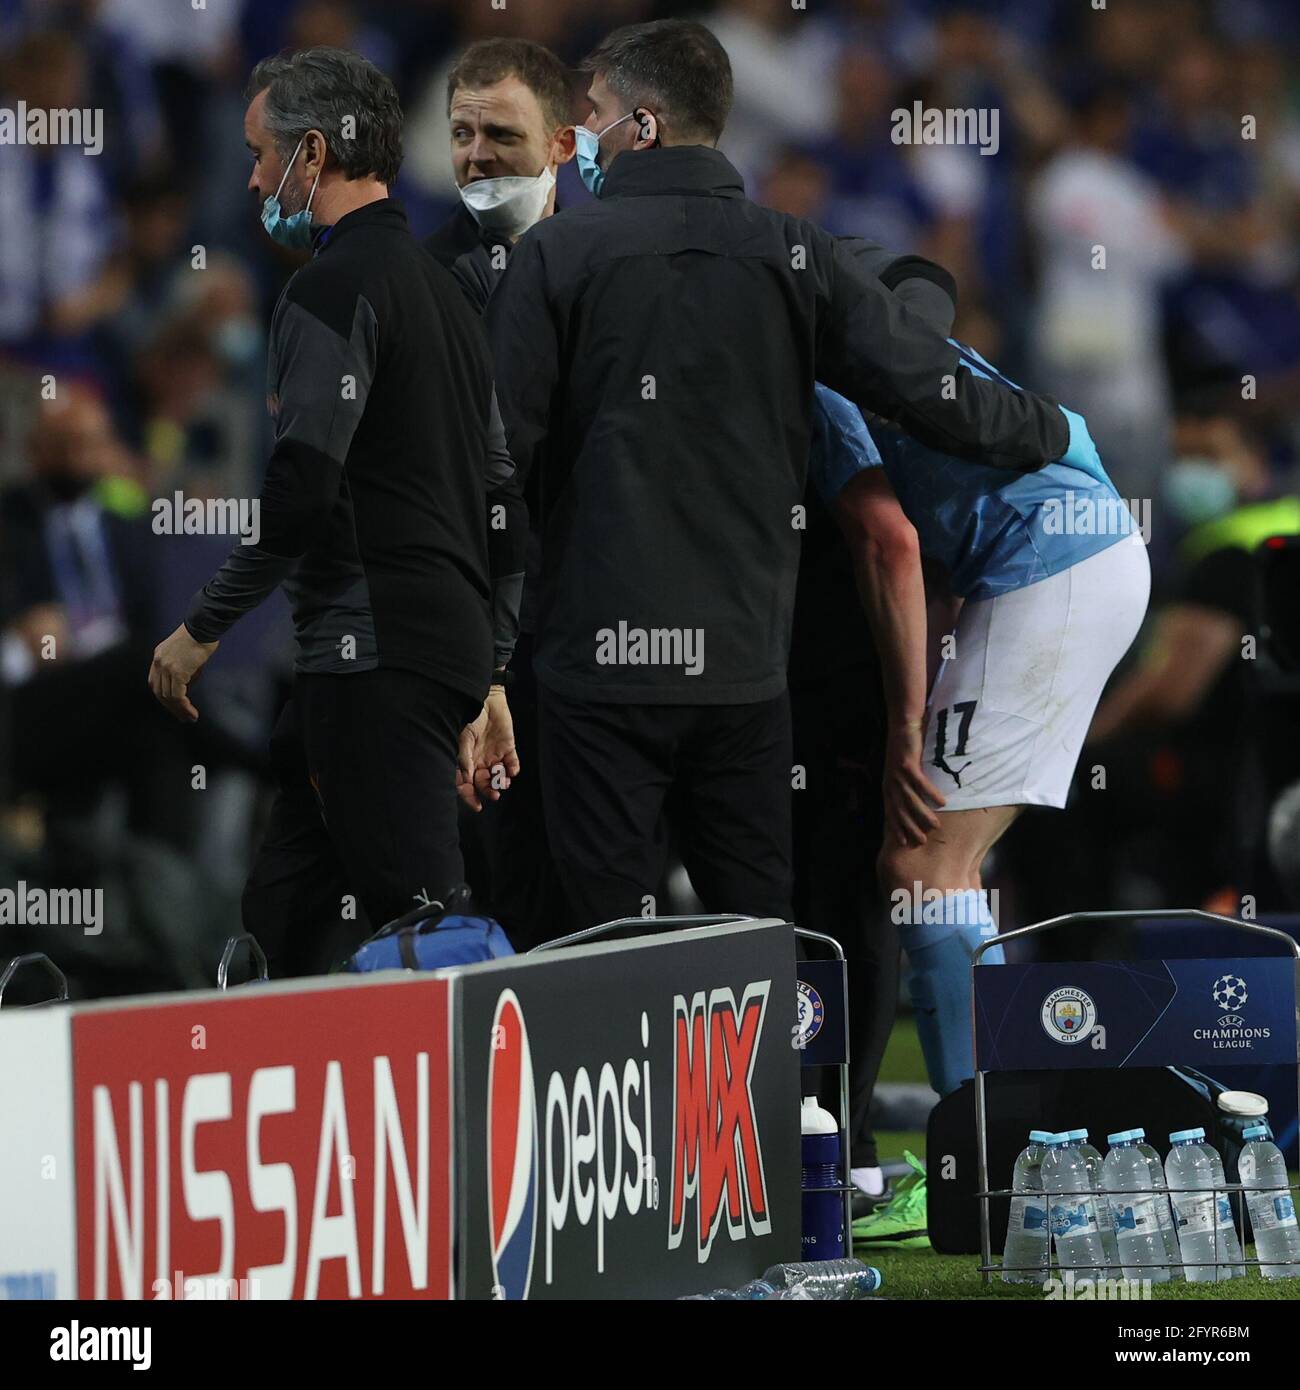 PORTO, PORTUGAL - MAY 29: Kevin De Bruyne of Manchester City is taken off  after his collision with Antonio Rudiger of Chelsea during the UEFA  Champions League Final between Manchester City and